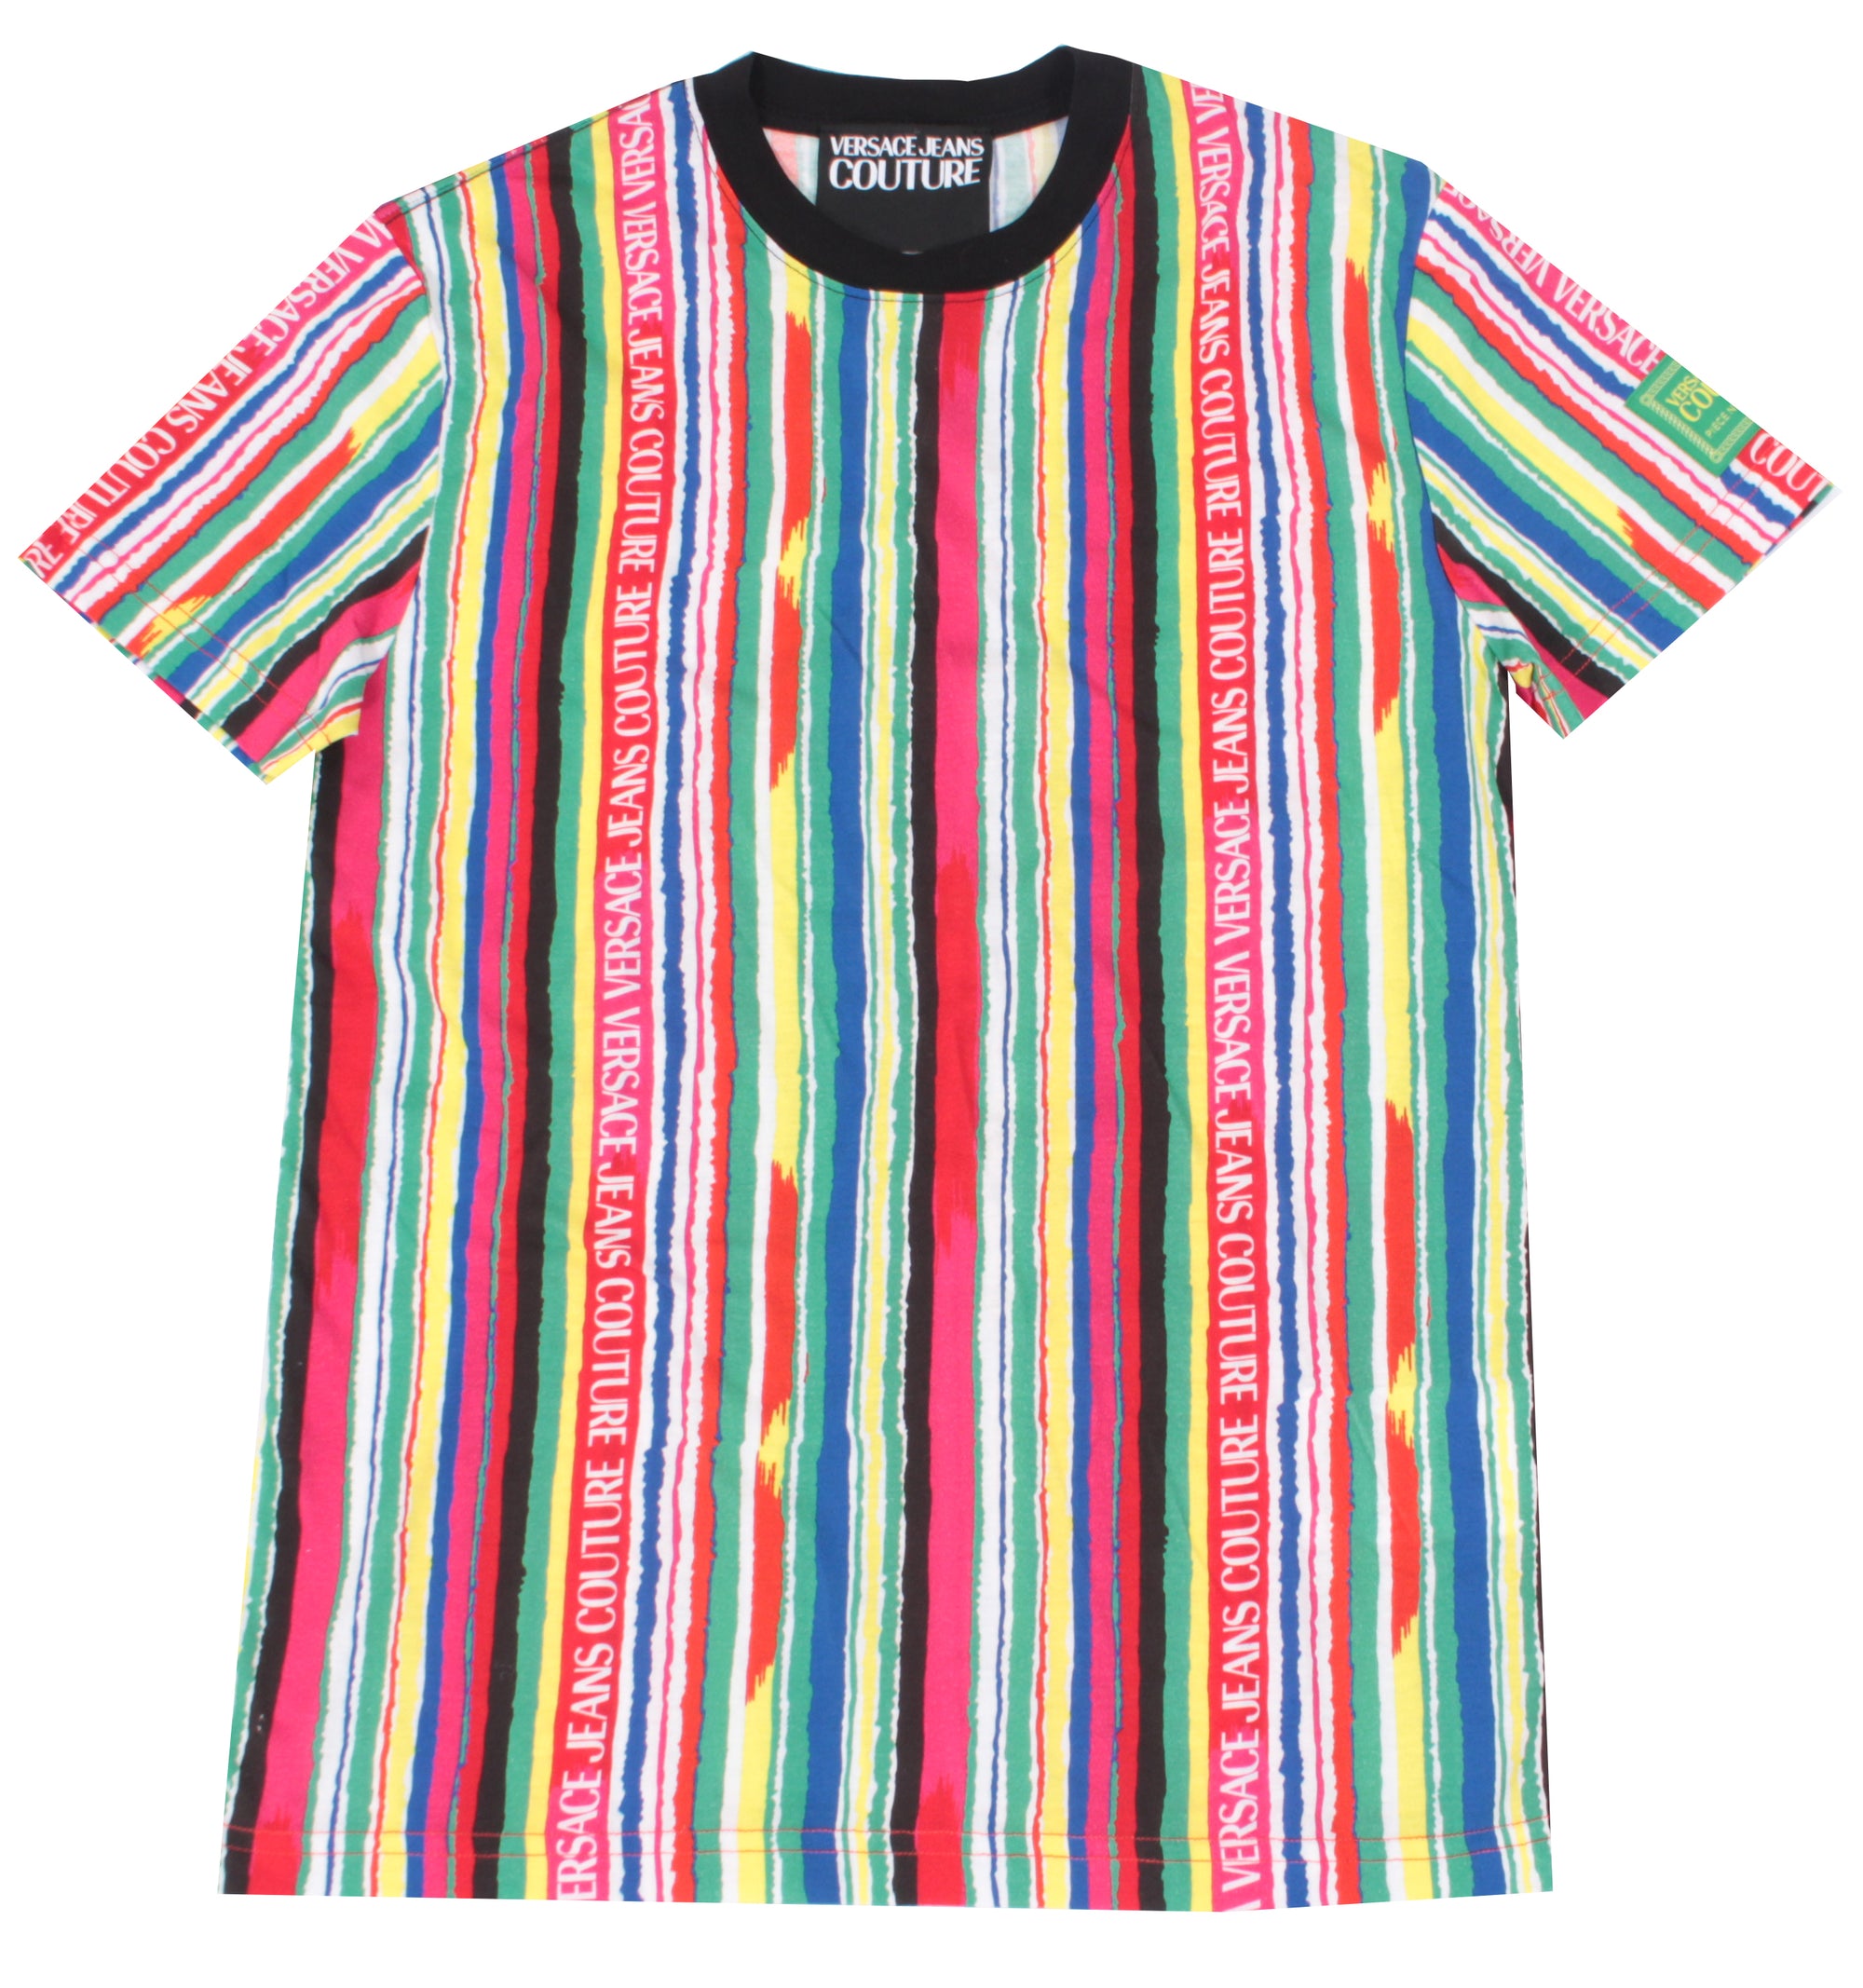 Versace Jeans Couture Allover Print Tee - Multi